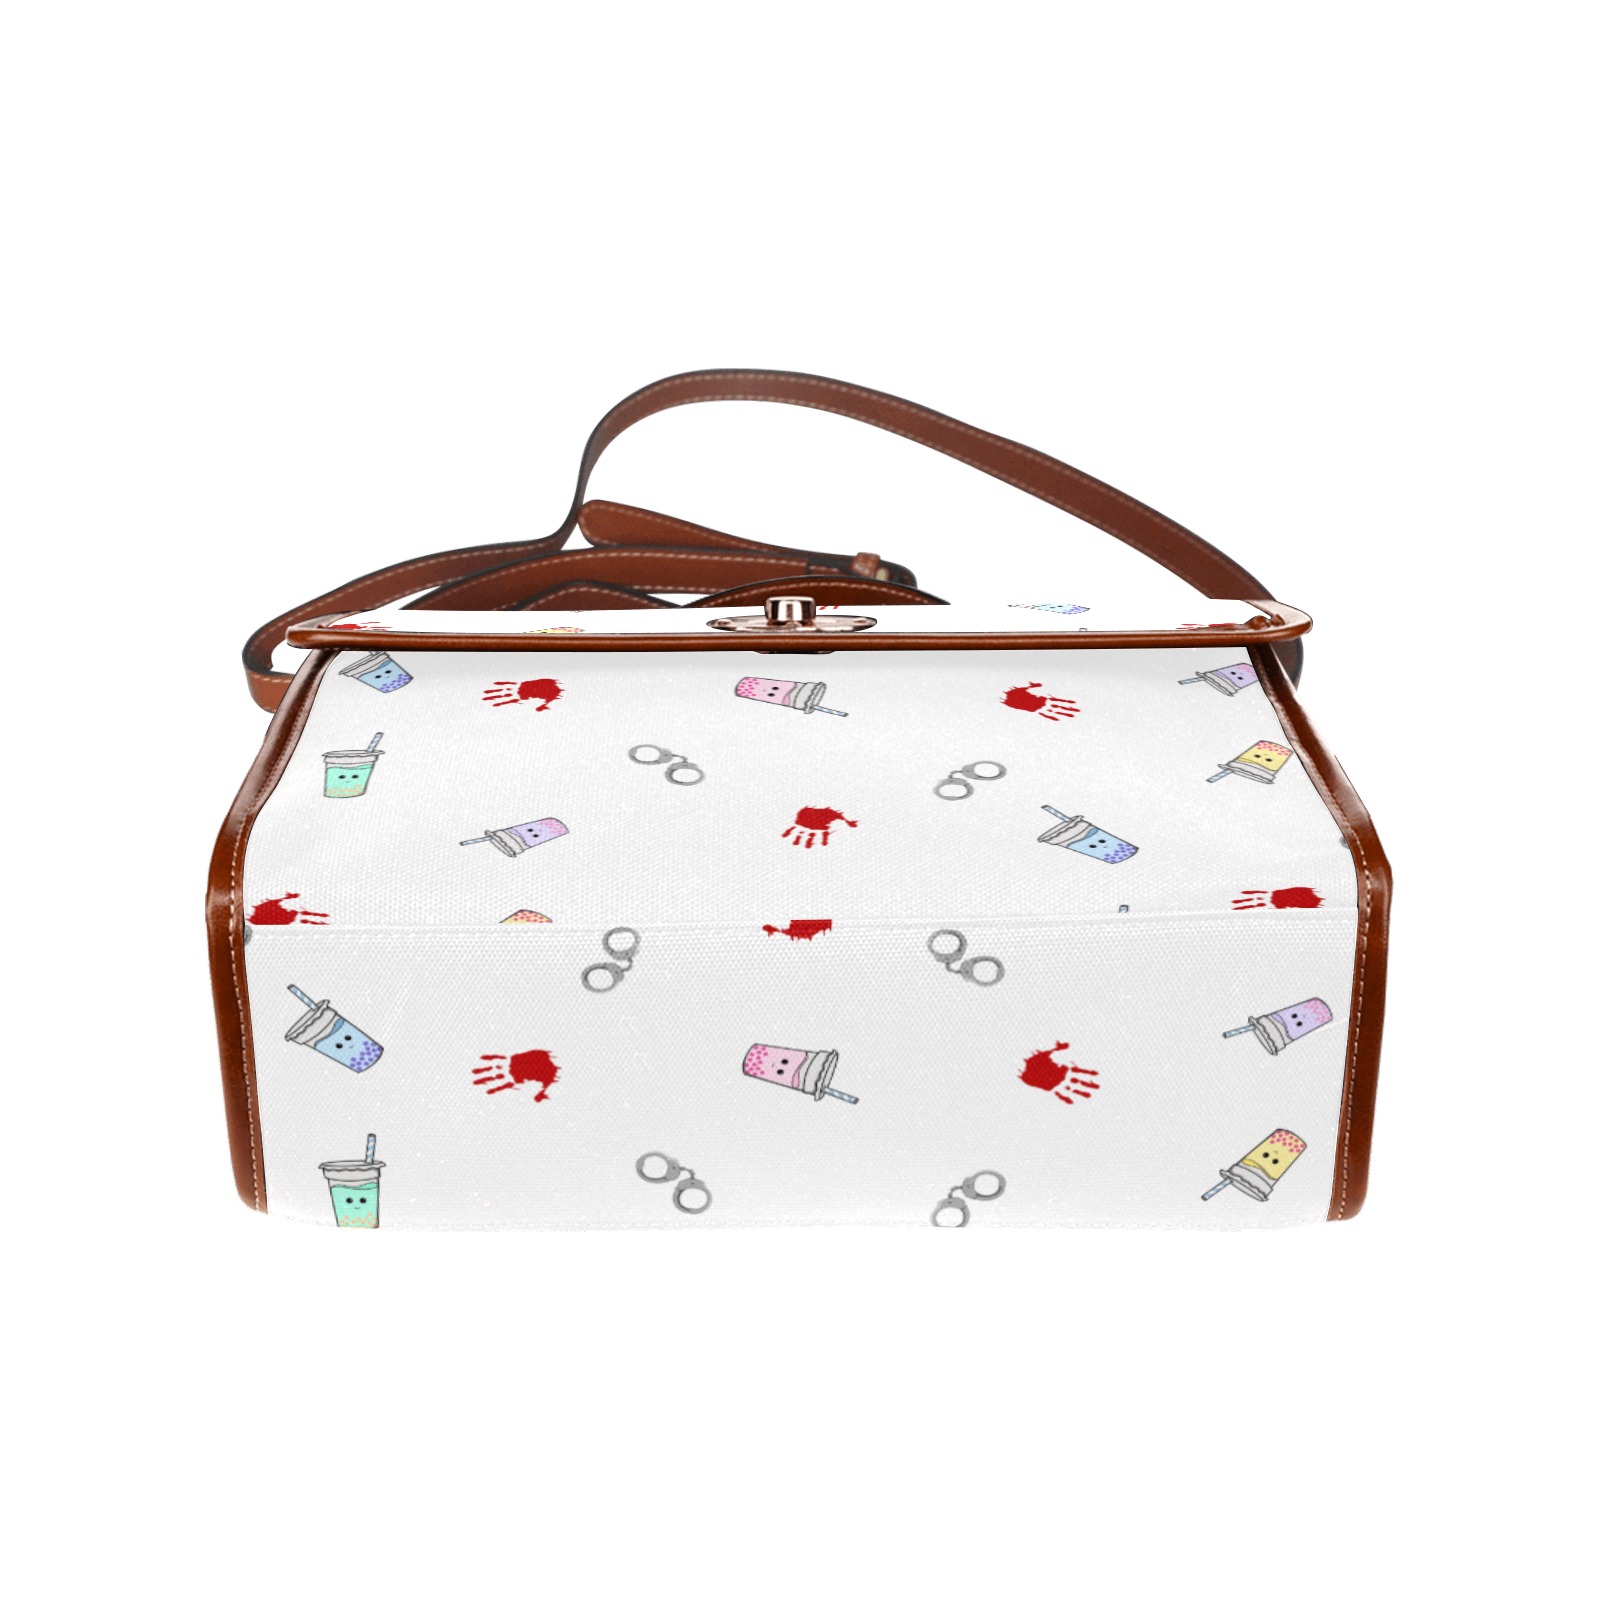 True Crime & Boba Time Purse W/ Brown straps Waterproof Canvas Bag-Brown (All Over Print) (Model 1641)